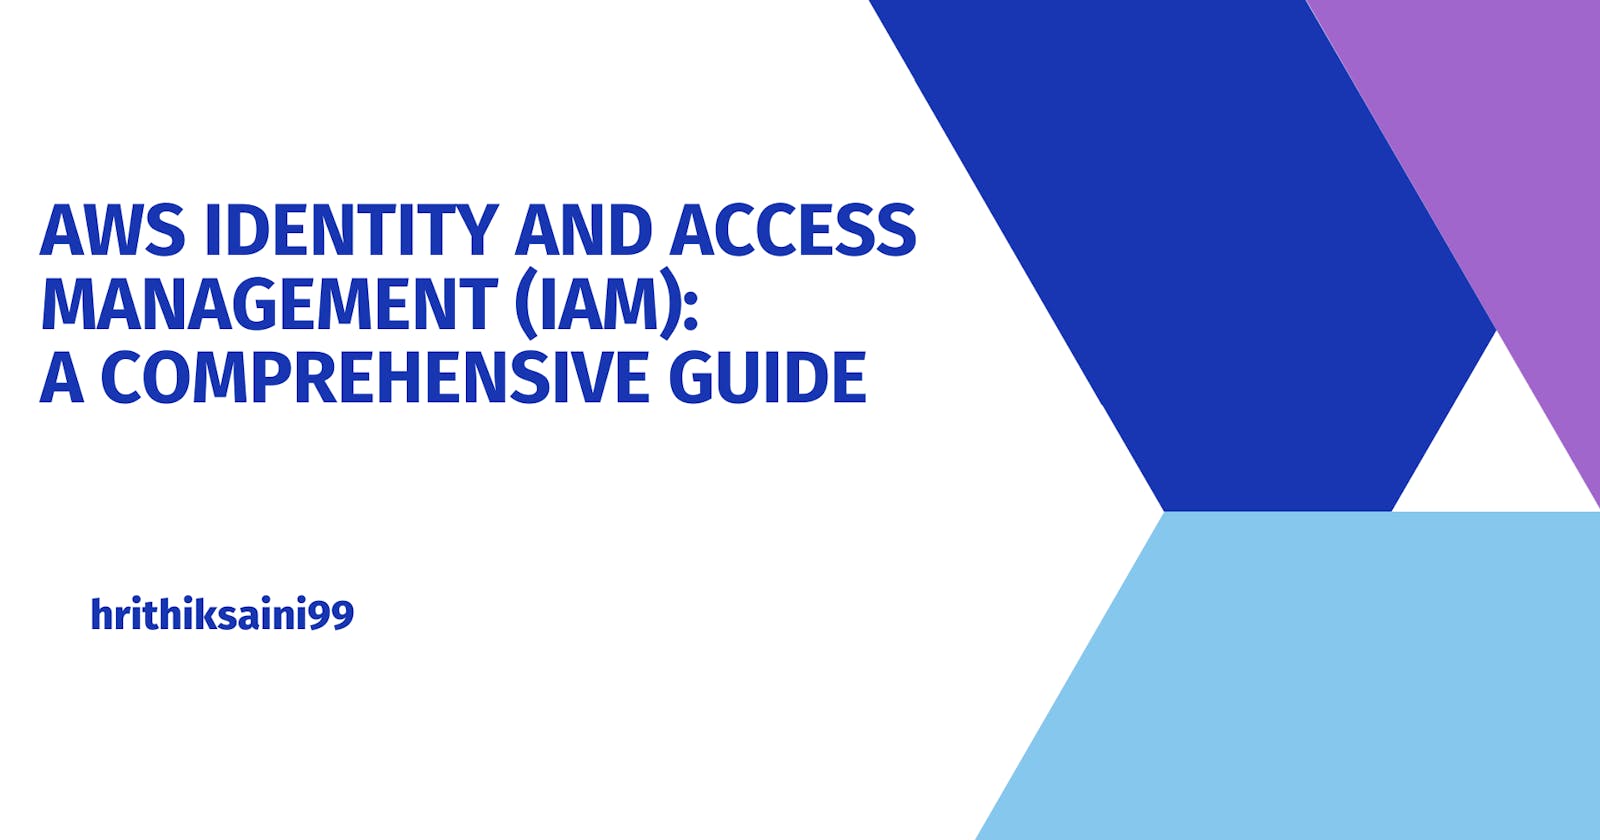 AWS Identity and Access Management (IAM): A Comprehensive Guide